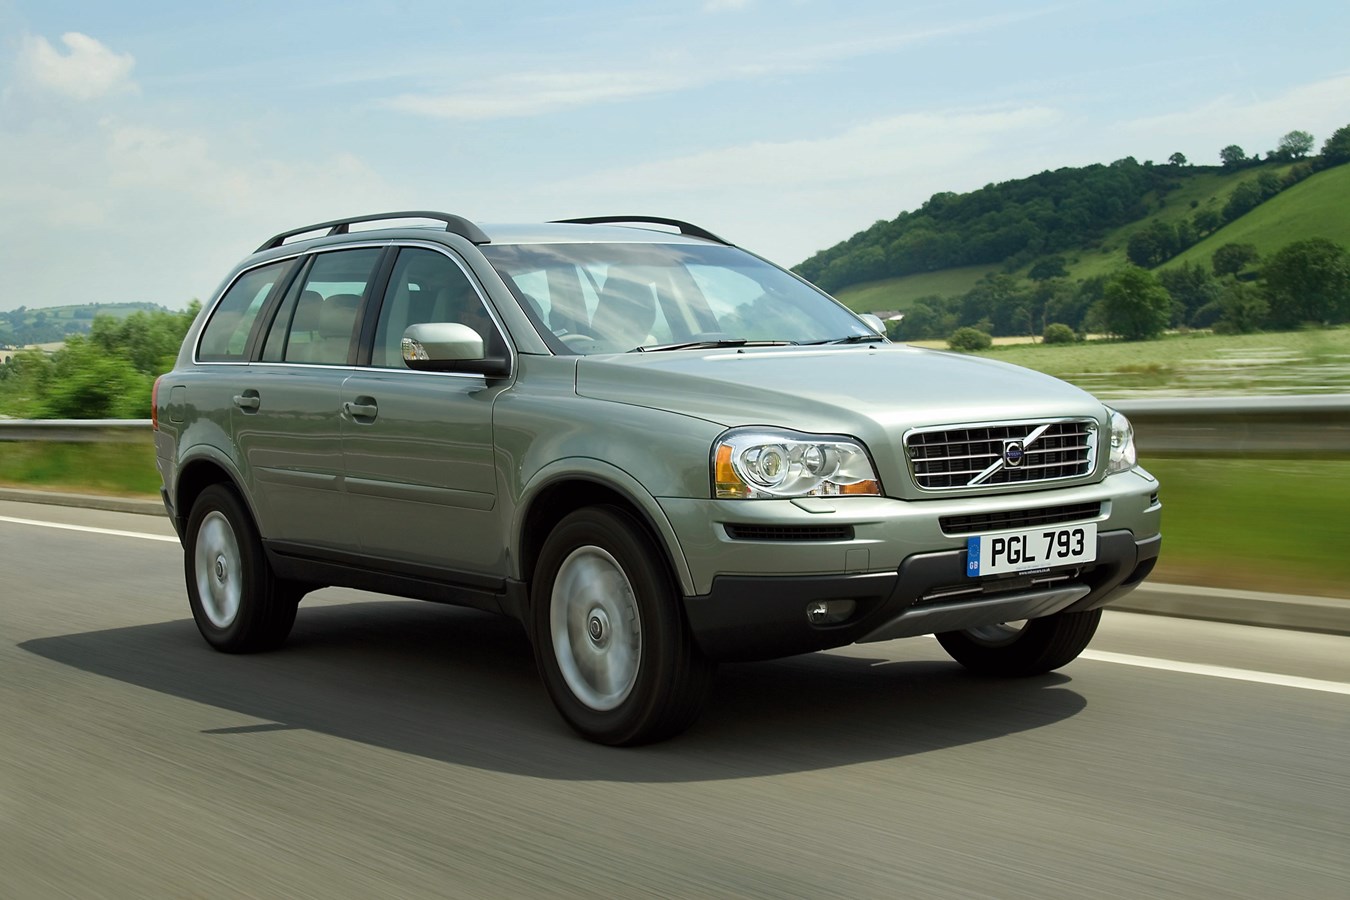 TRIPLE HONOURS FOR VOLVO USED CARS AND GREAT NEWS FOR BUYERS ON A BUDGET